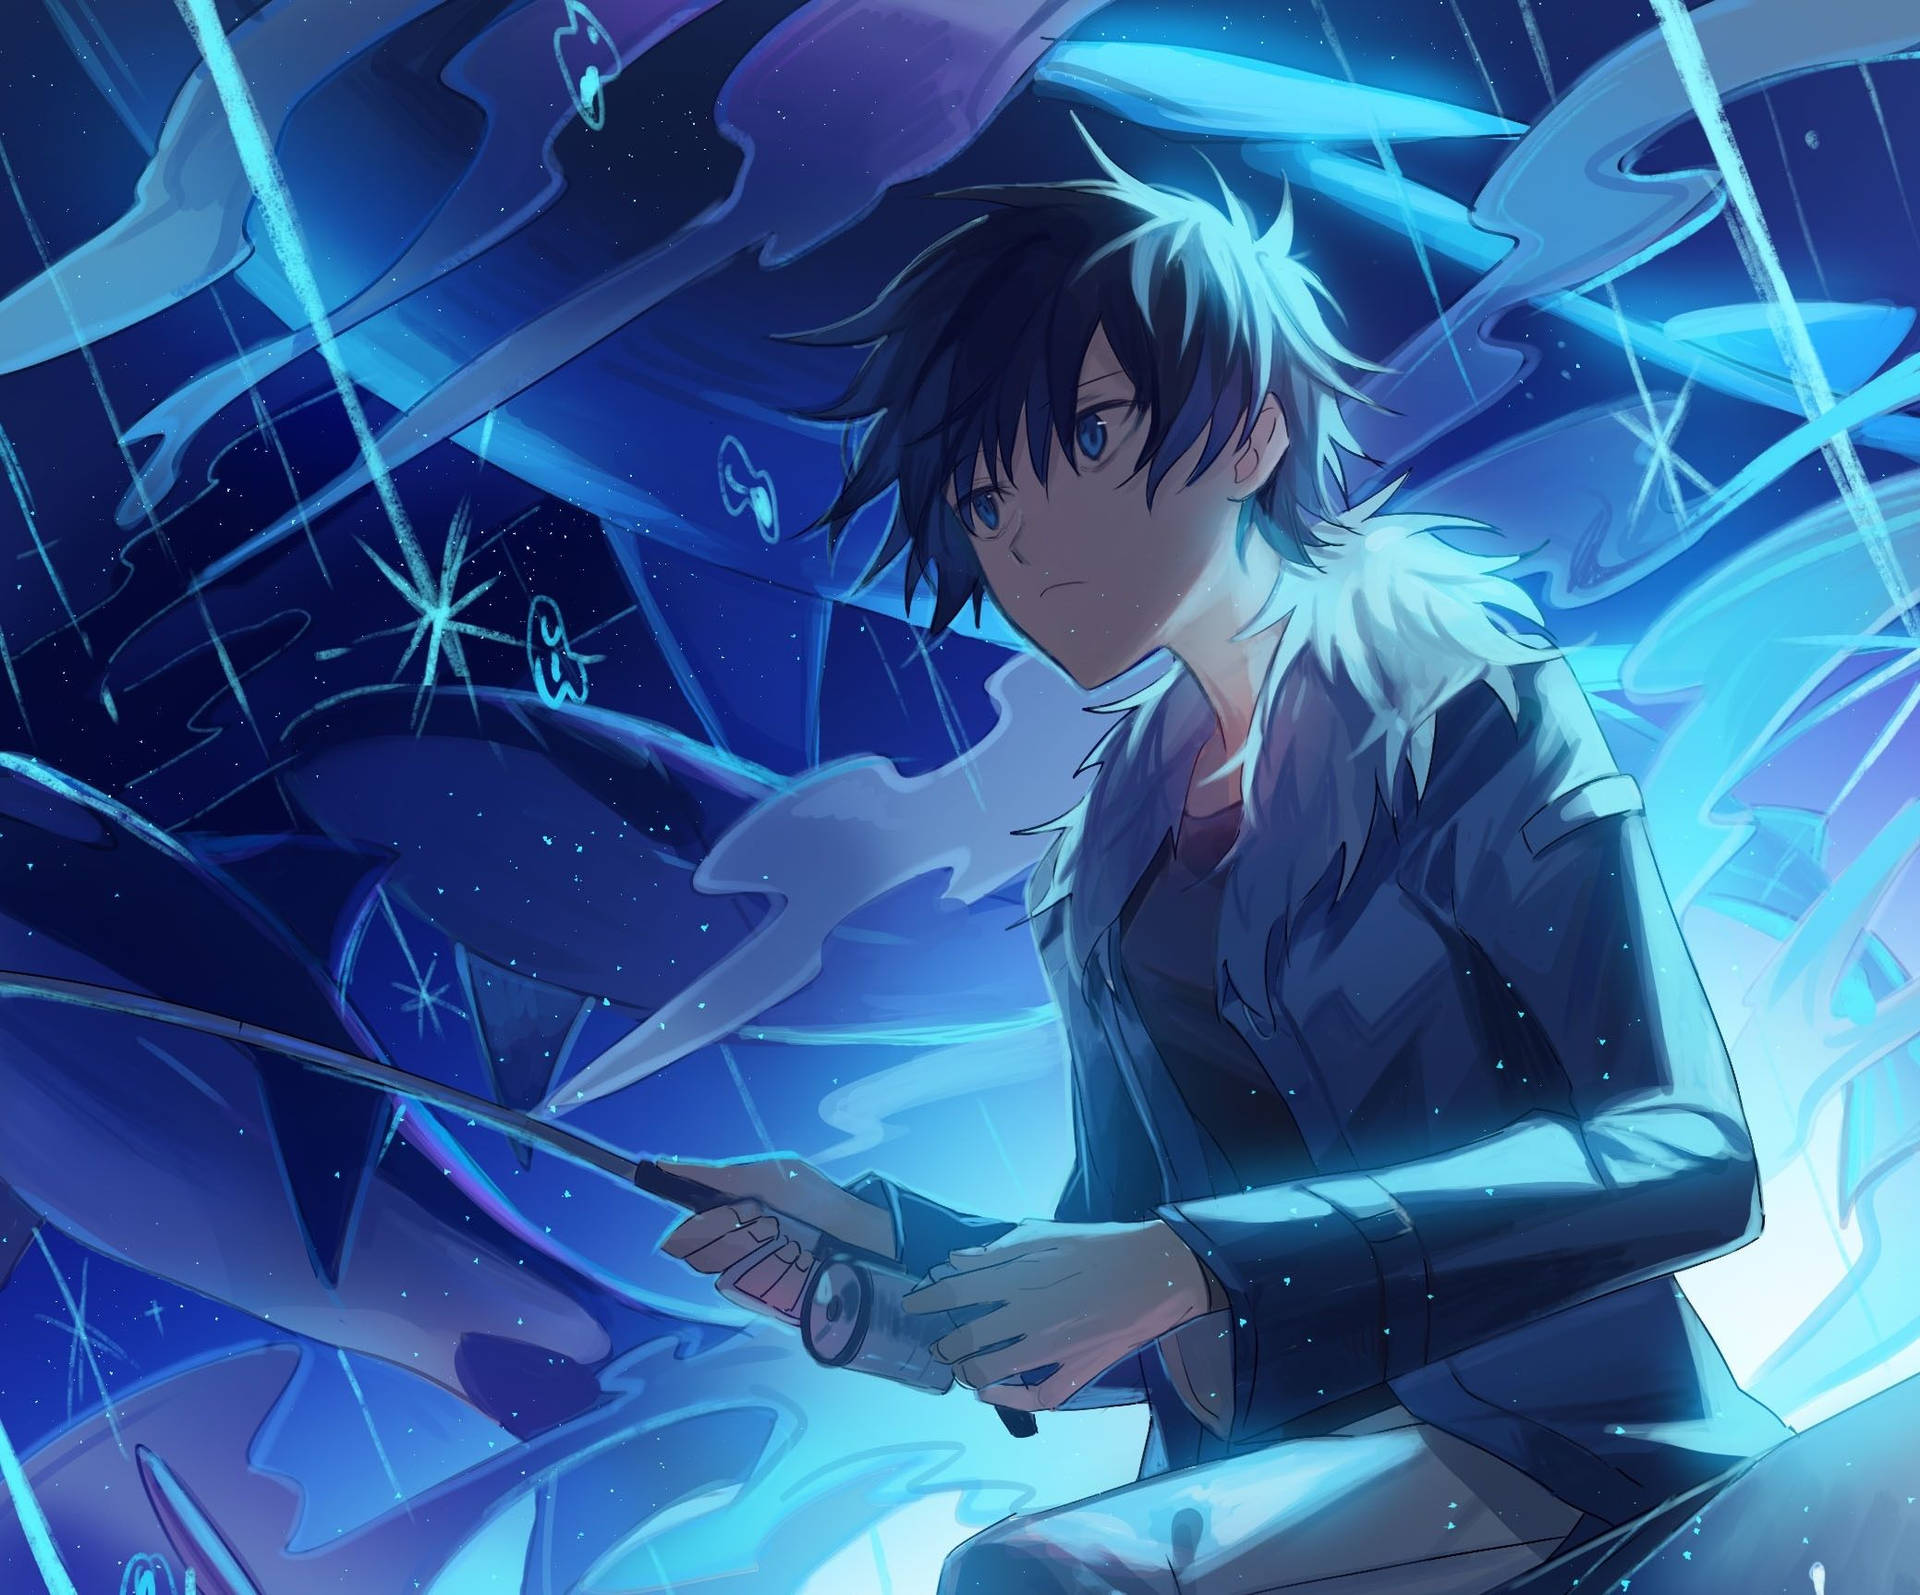 A blue-tinted anime boy against a starry night sky Wallpaper